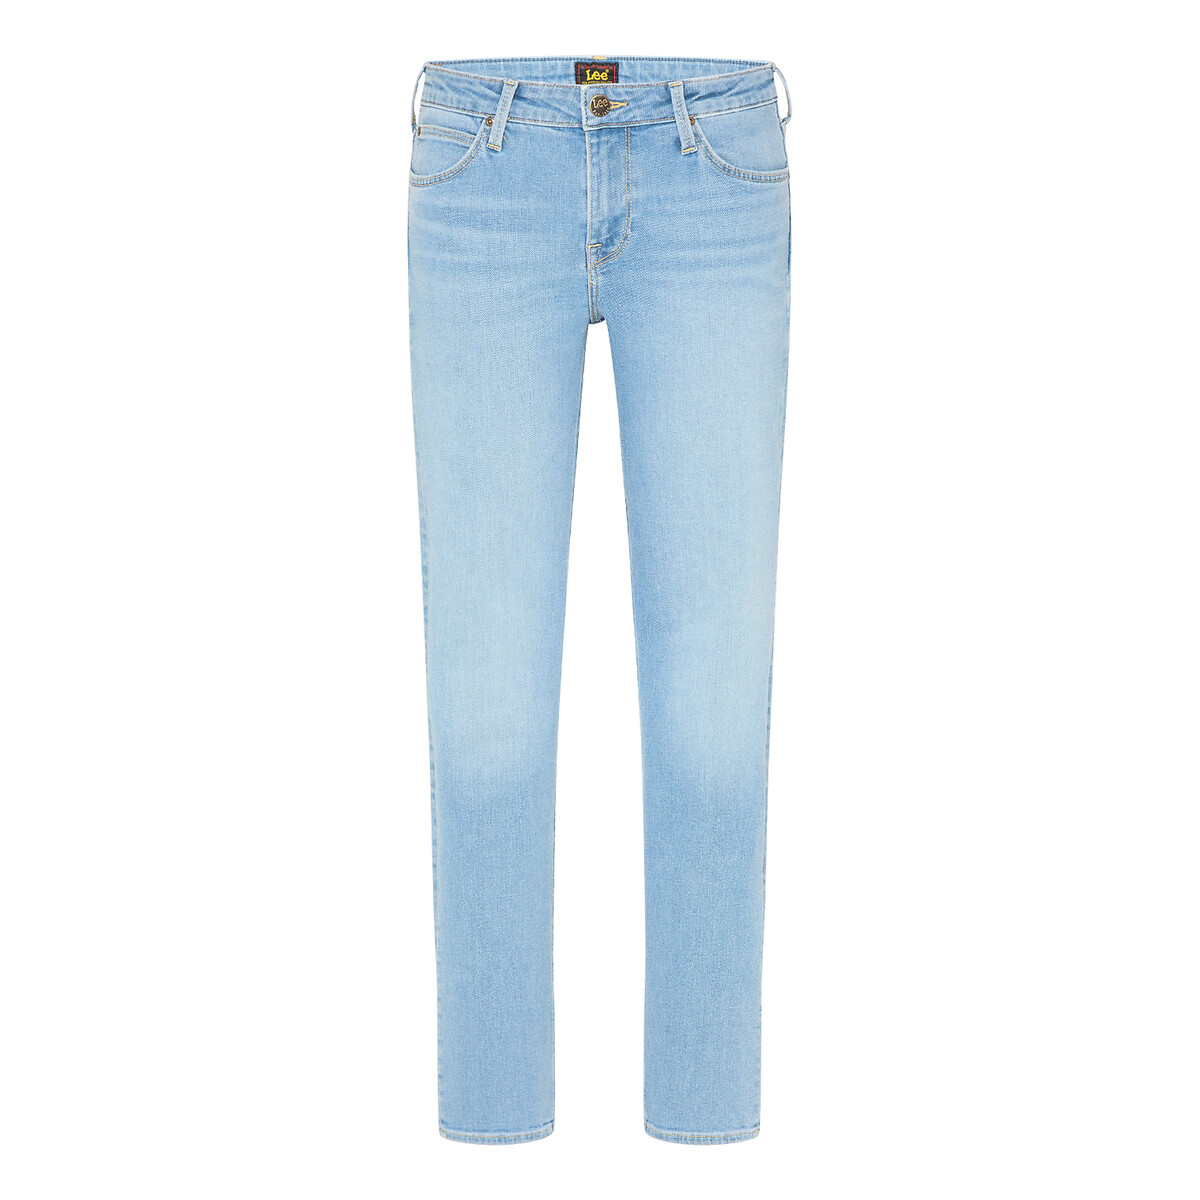 Image of Elly Slim Fit Jeans with High Waist